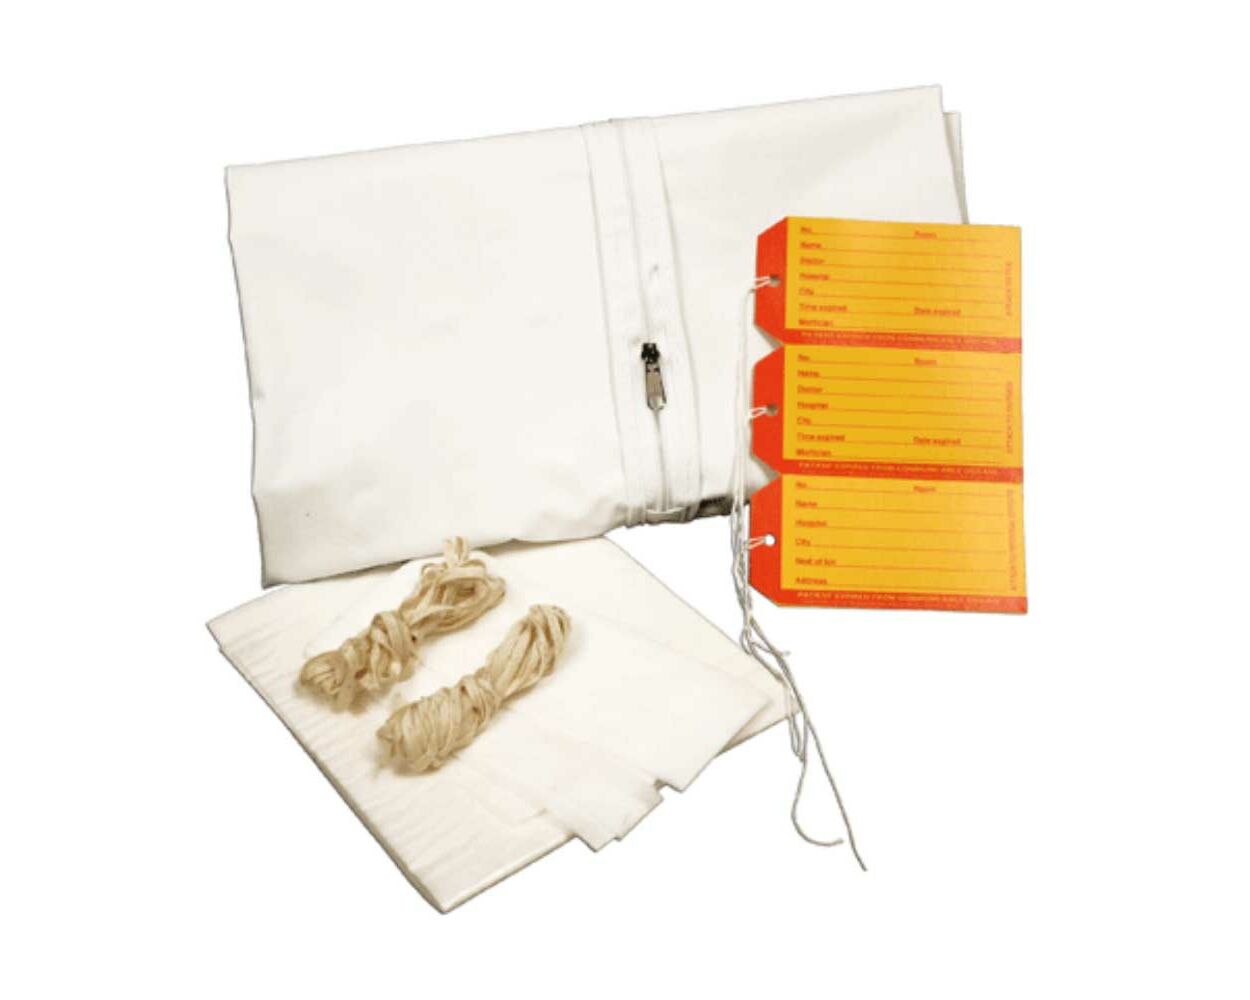 Emergency Kits Products, Supplies and Equipment